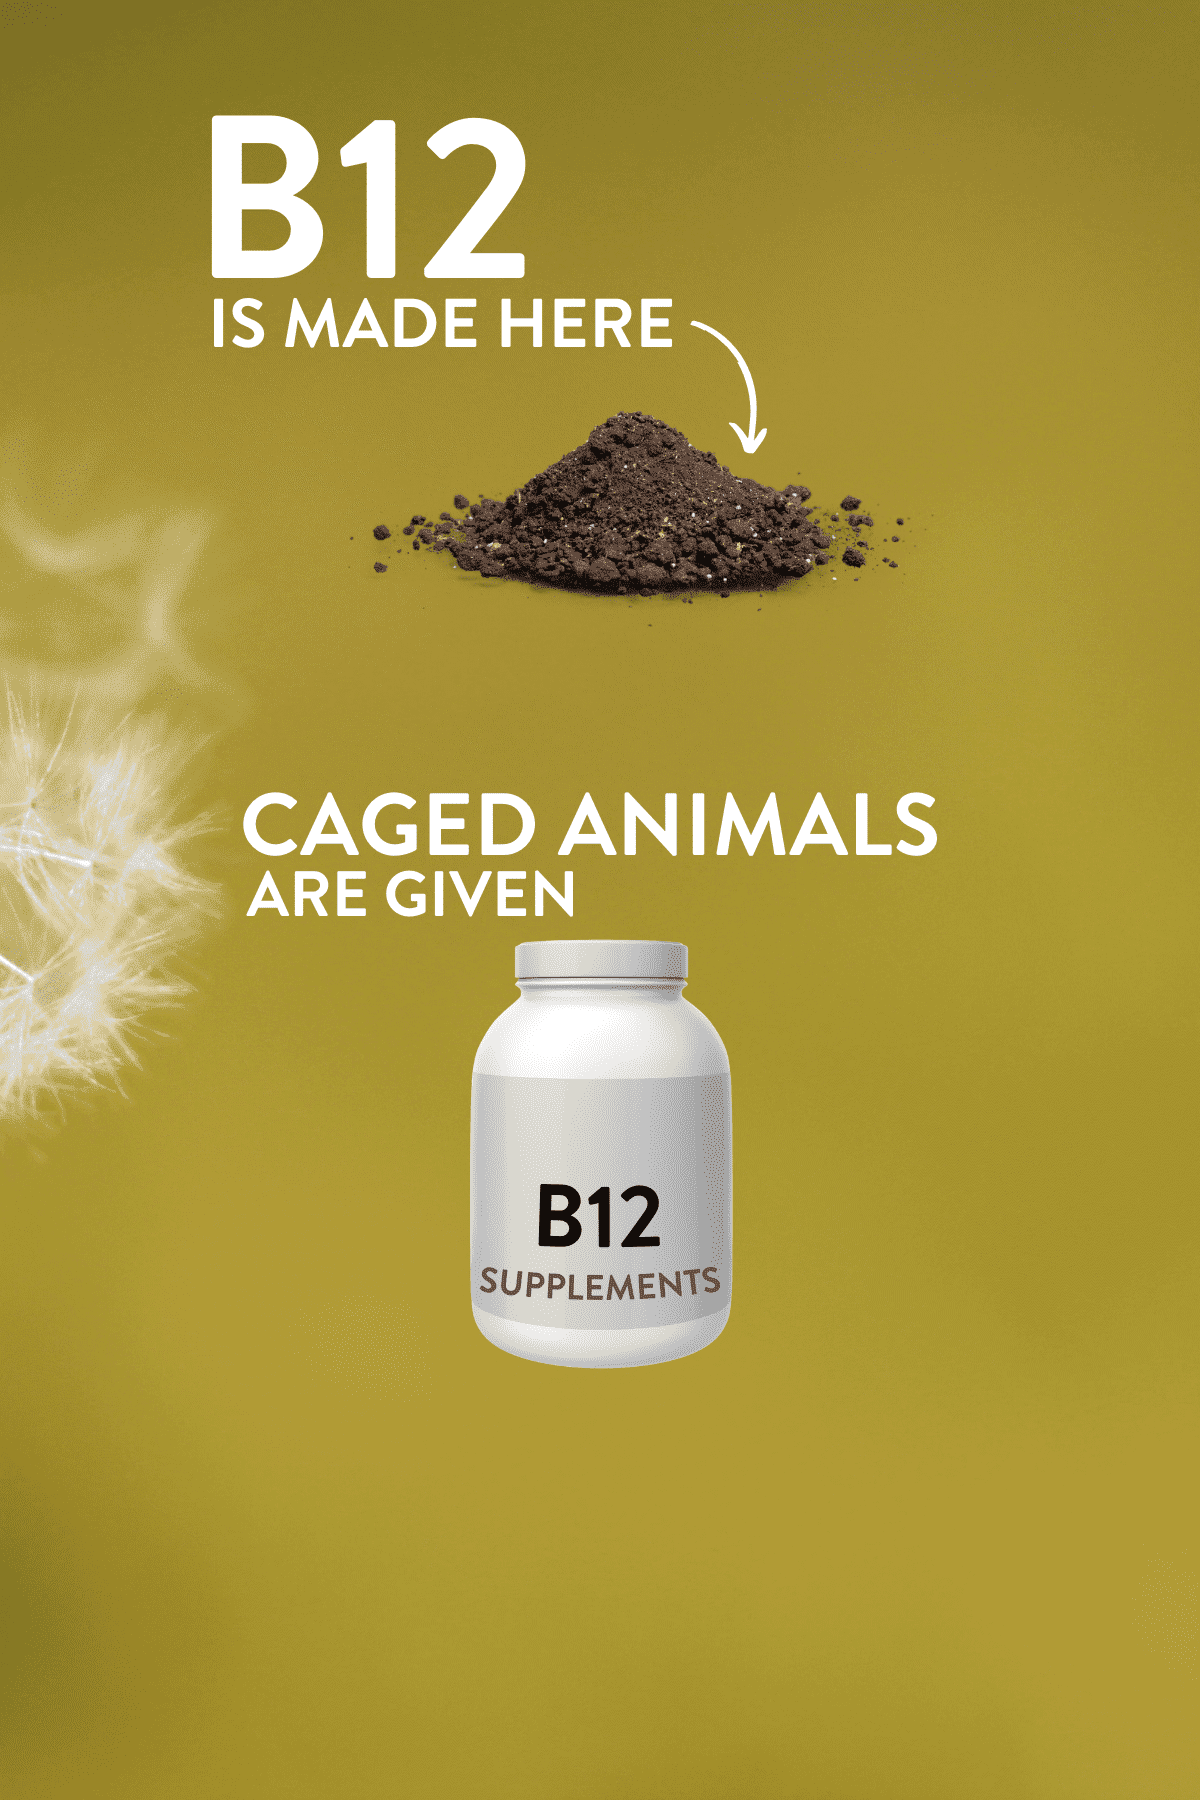 Where Does B12 Come From?